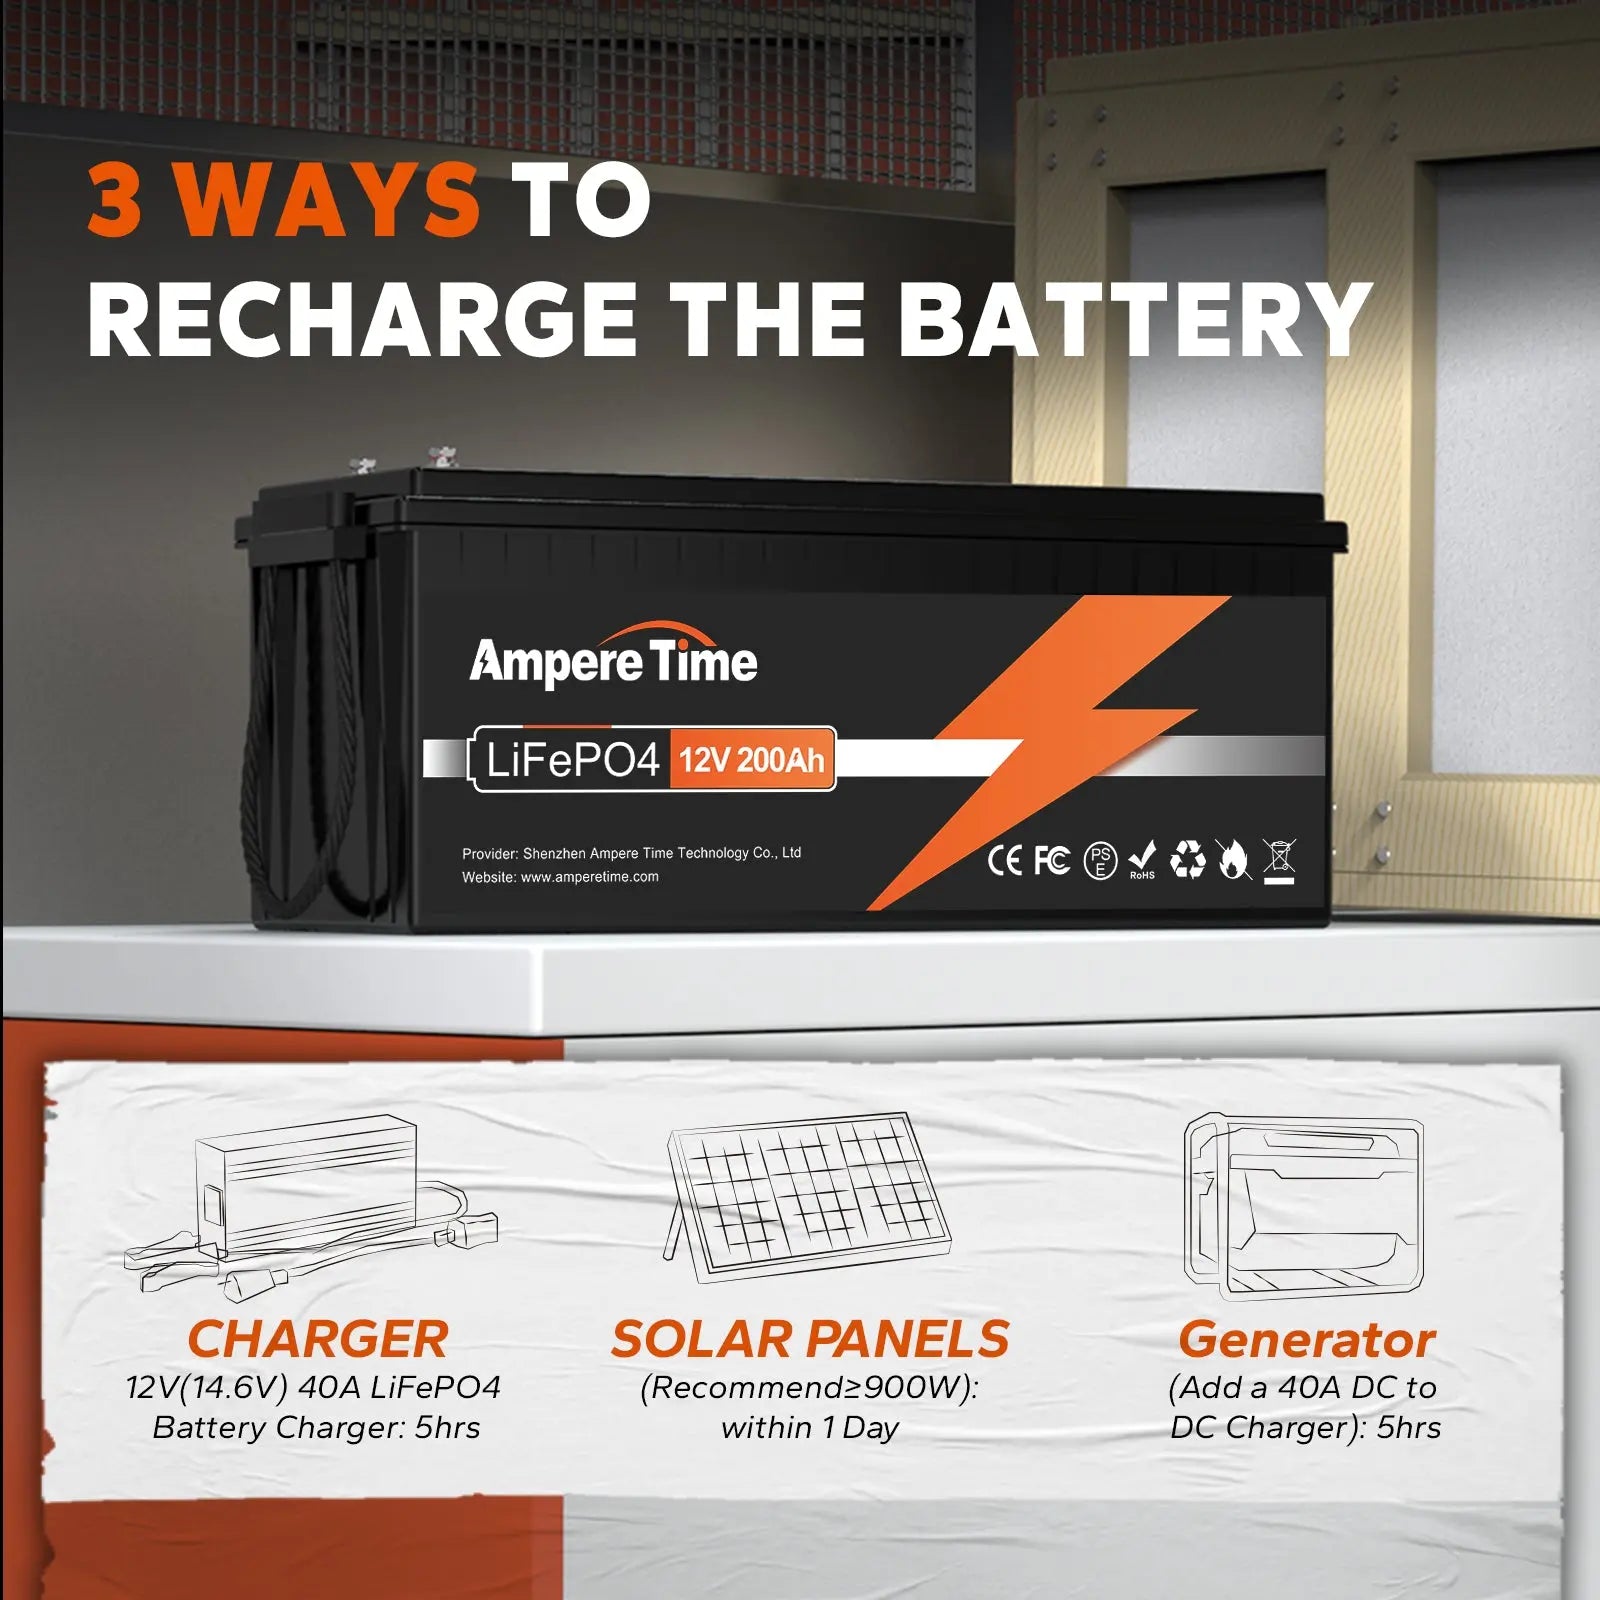 Ampere Time 12V 200Ah (100A BMS), 2560Wh LiFePO4 Solar Batteries with 4000+ Discharge Cycles Ampere Time